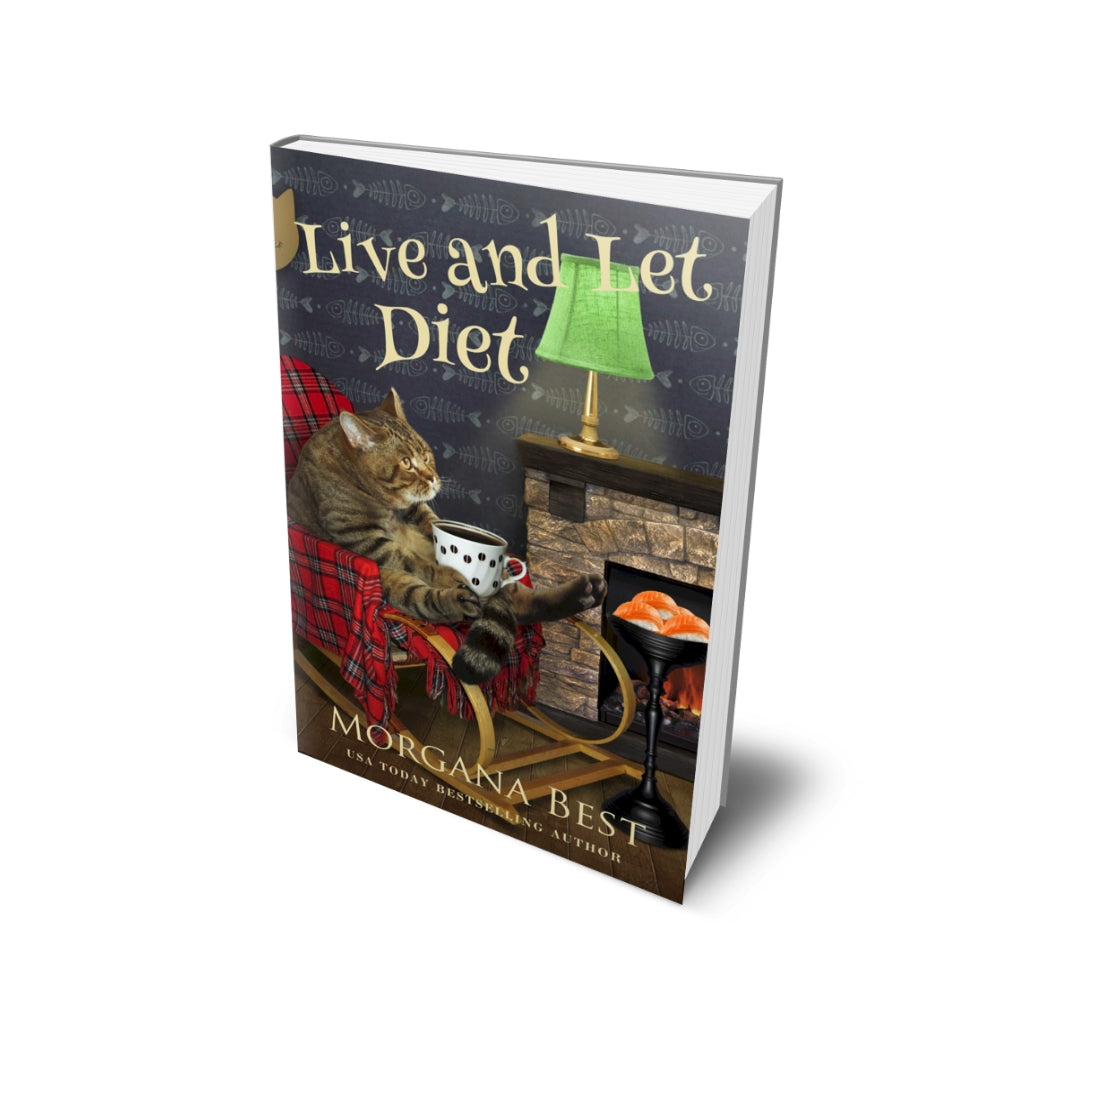 Live and Let Diet paperback cozy mystery